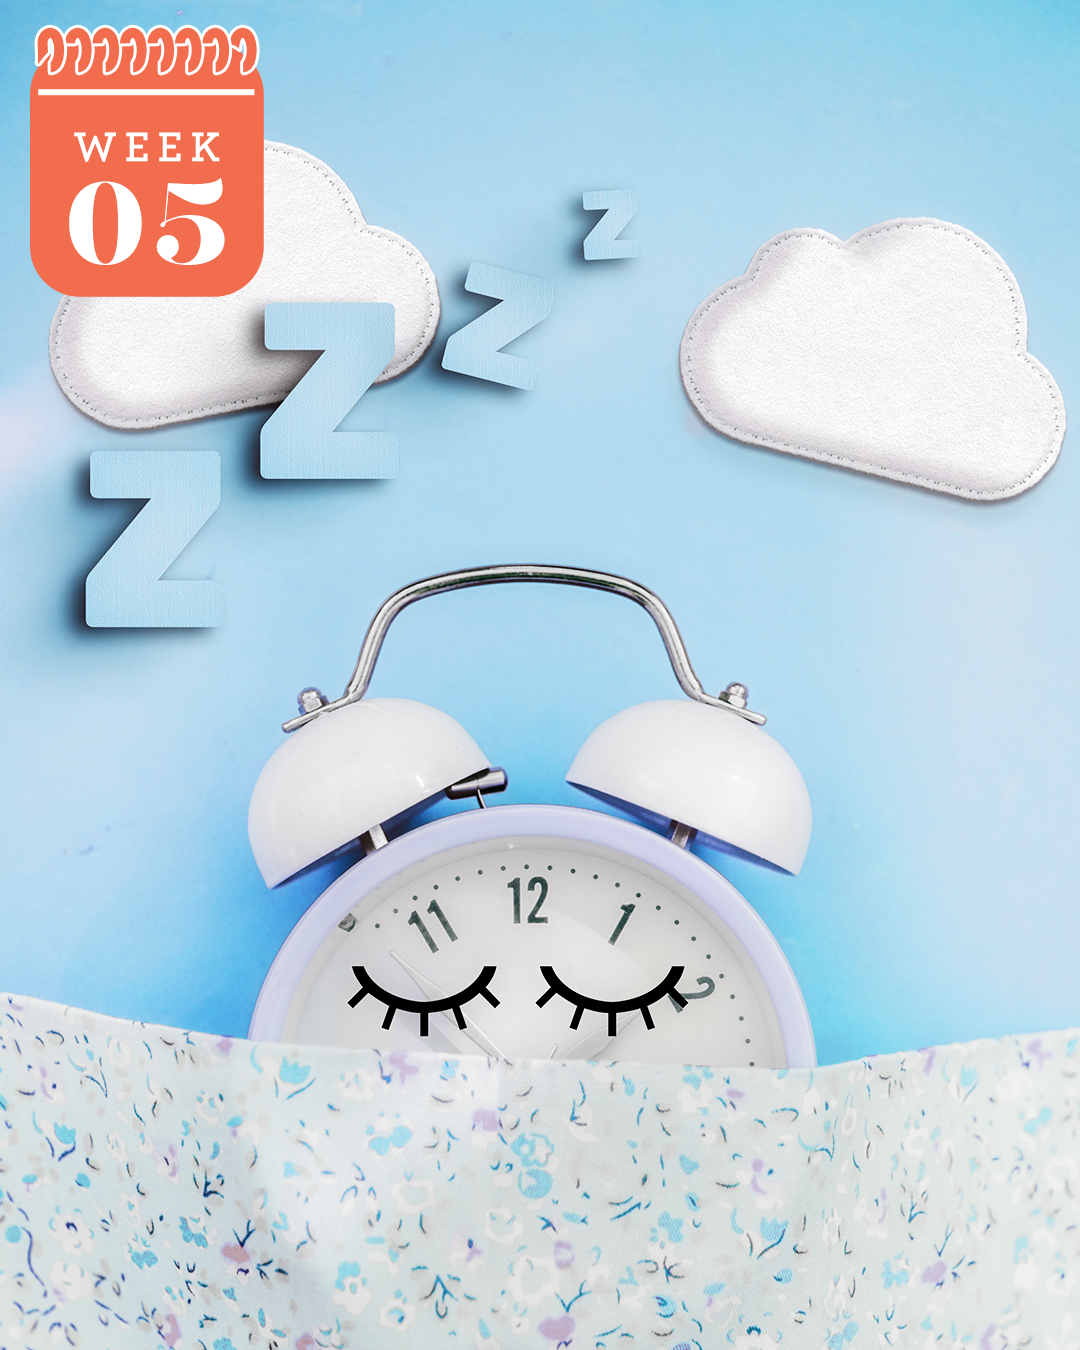 alarm clock with closed eyes drawn on under bedsheet